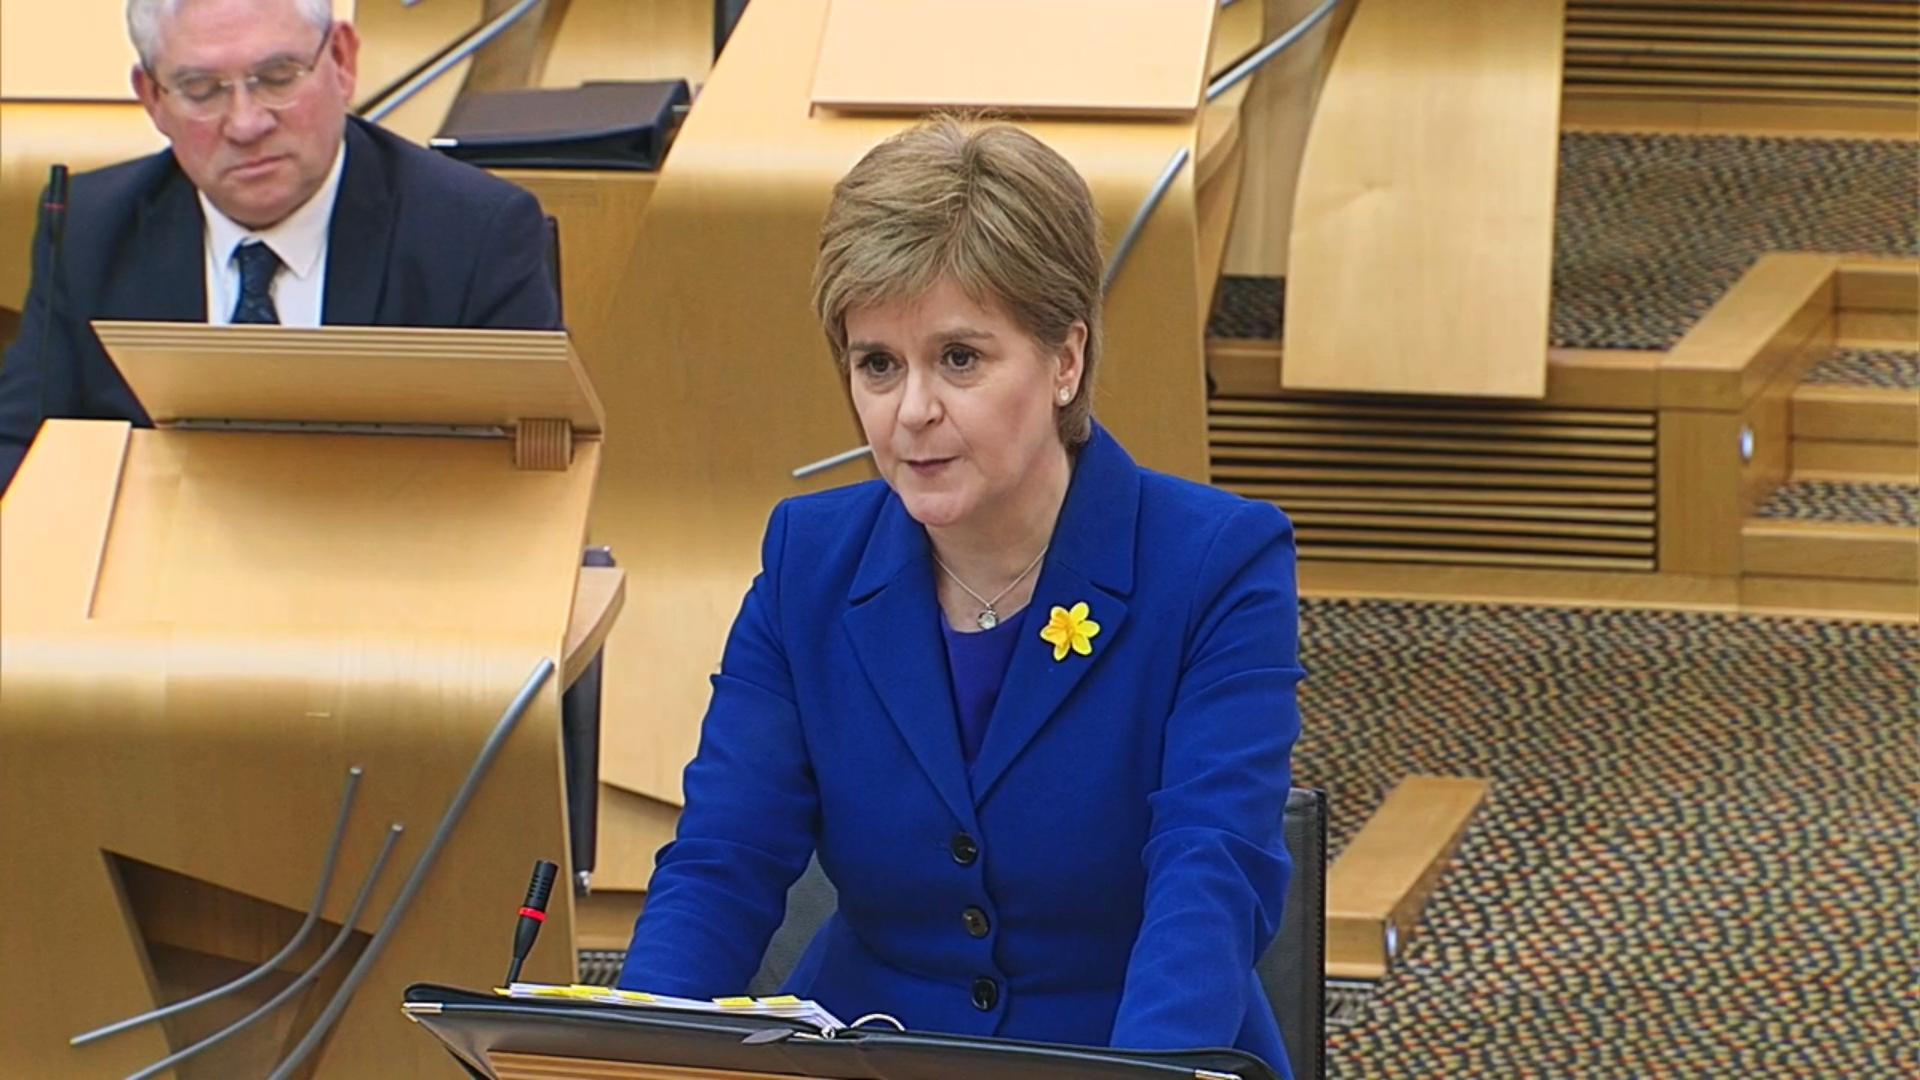 Nicola Sturgeon previously cancelled Gillian Martin's planned move to government after her comments came to light.